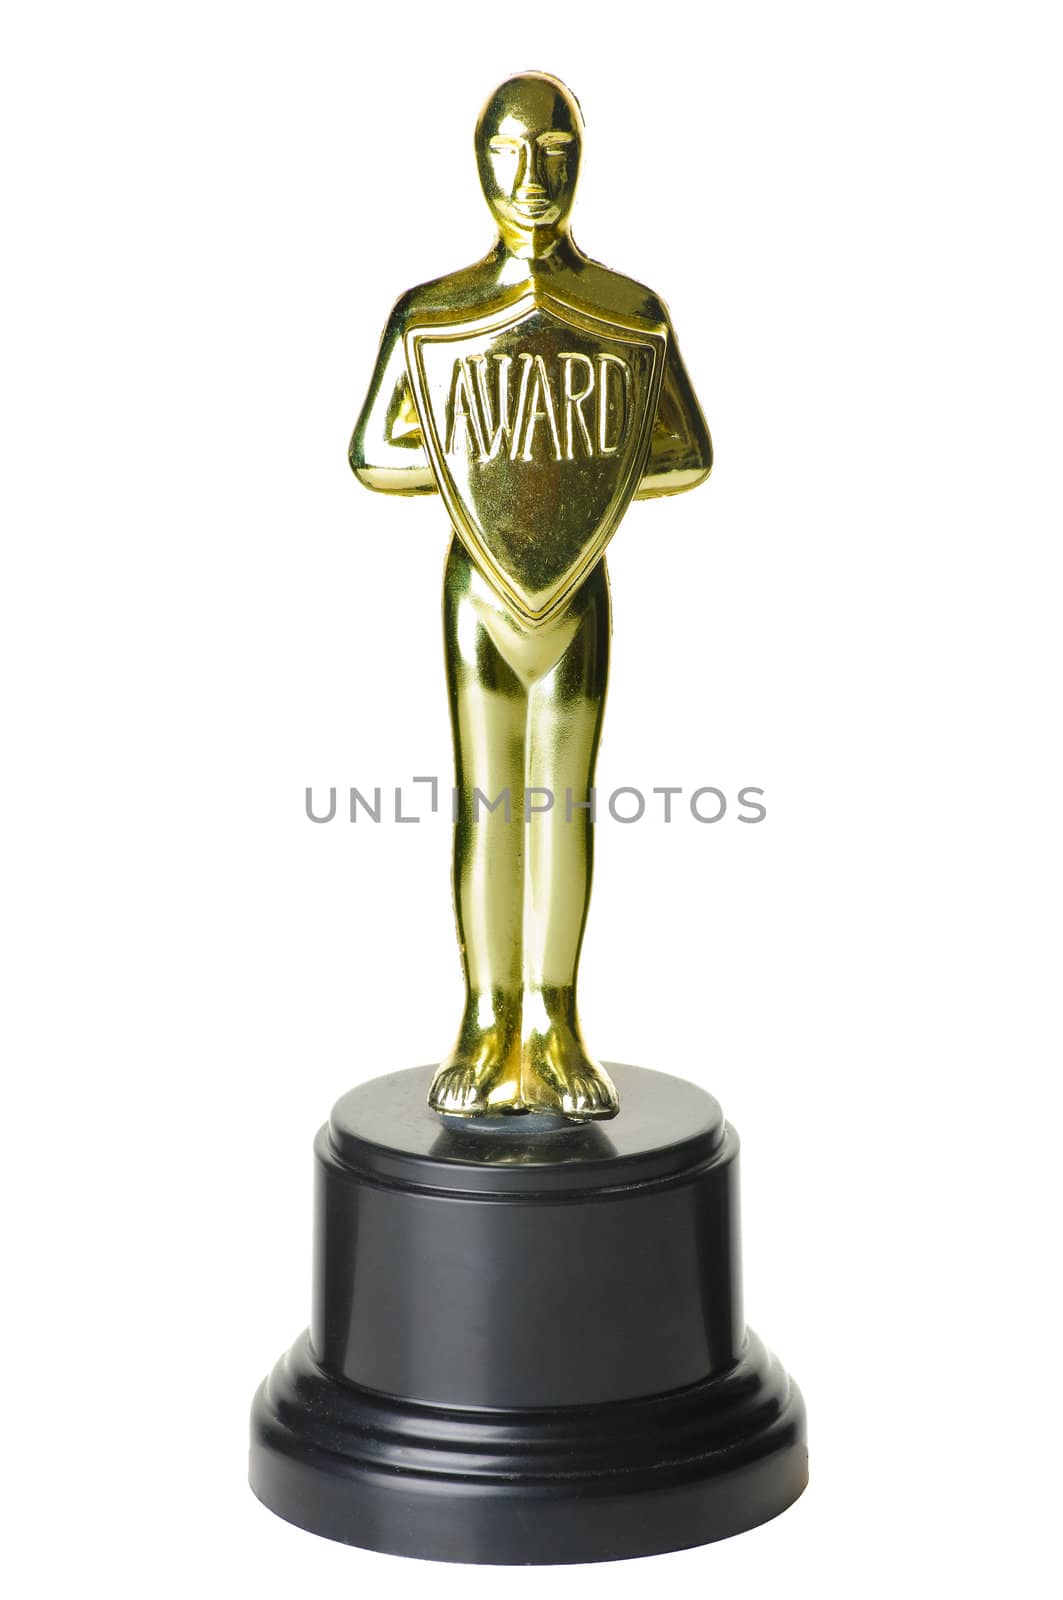 gold trophy on white background with path.